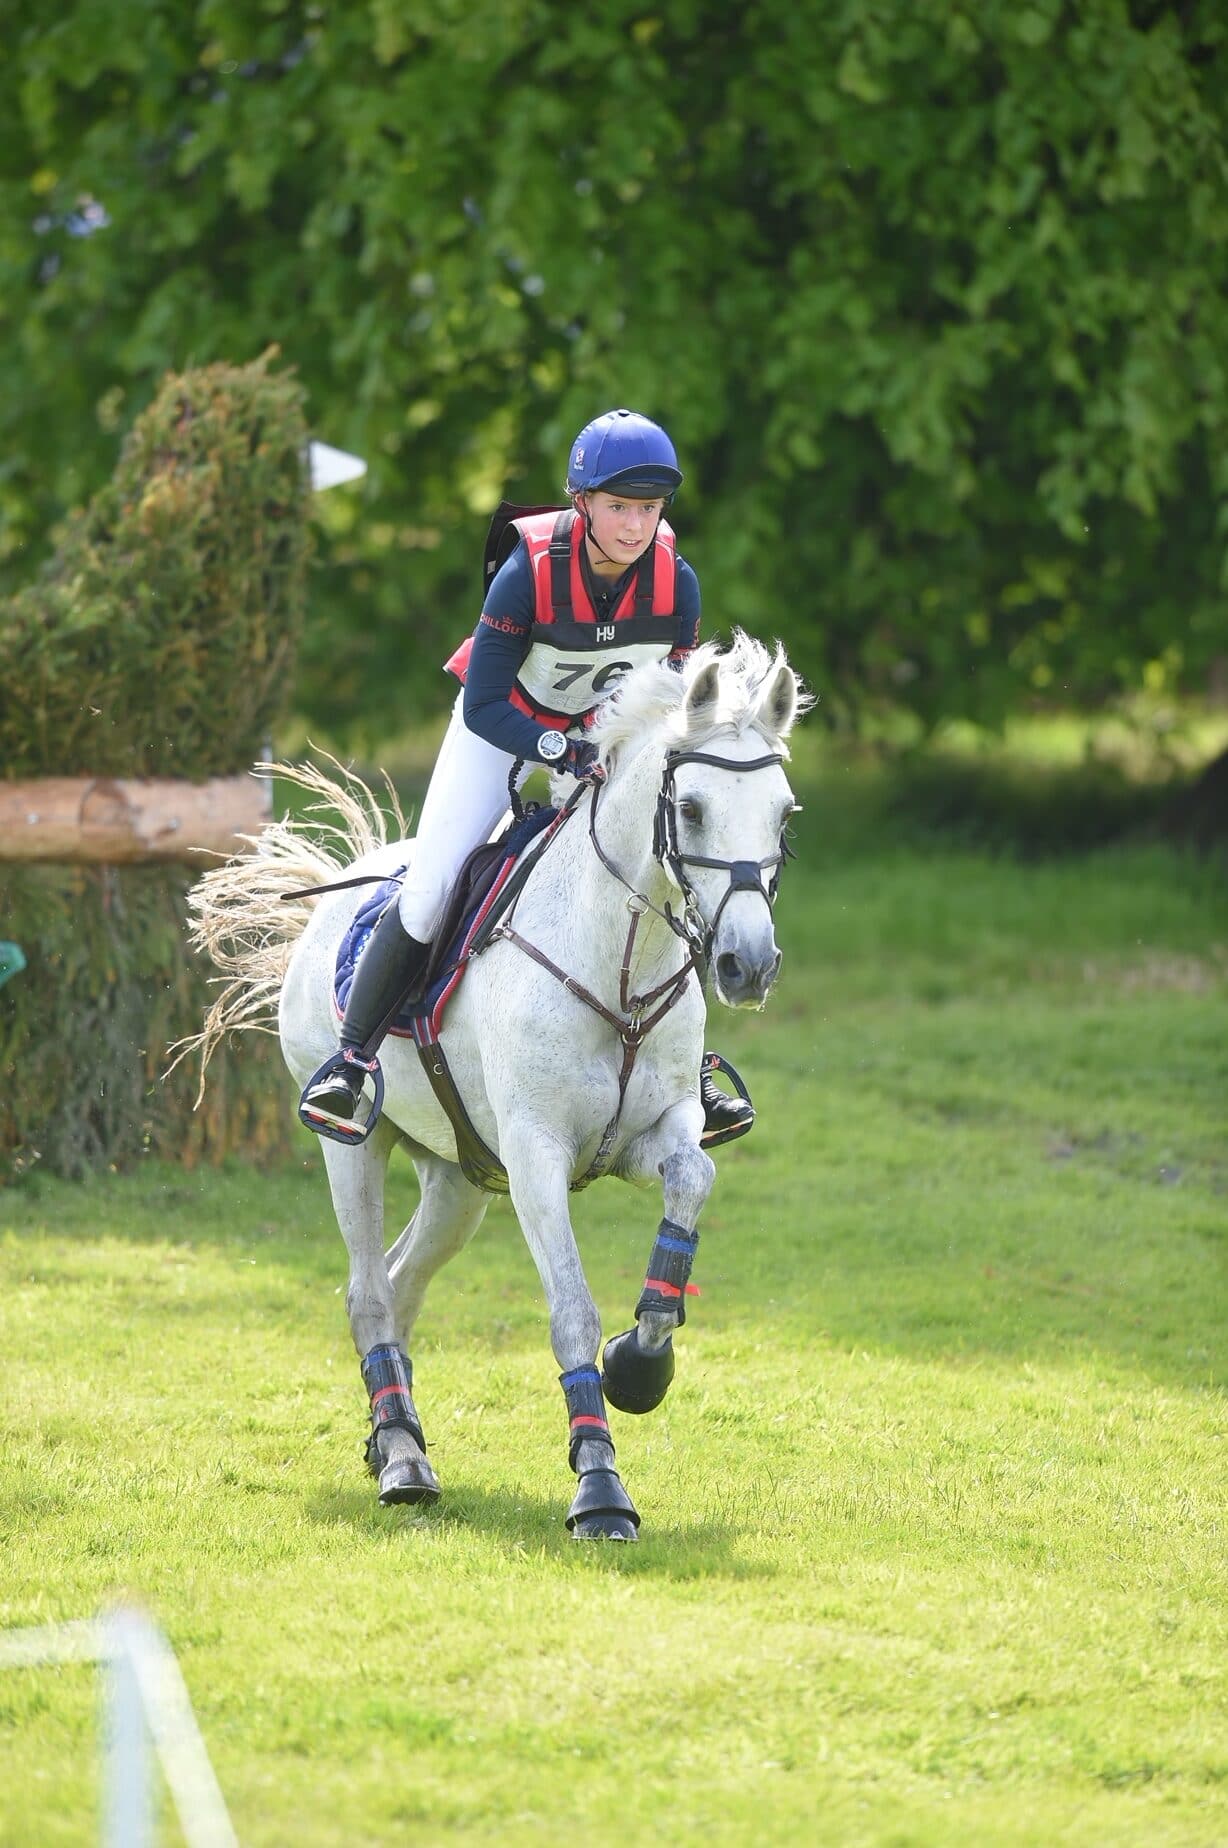 Isabella Smith at Belsay British Pony wearing the turtle 2 horse riding safety vest